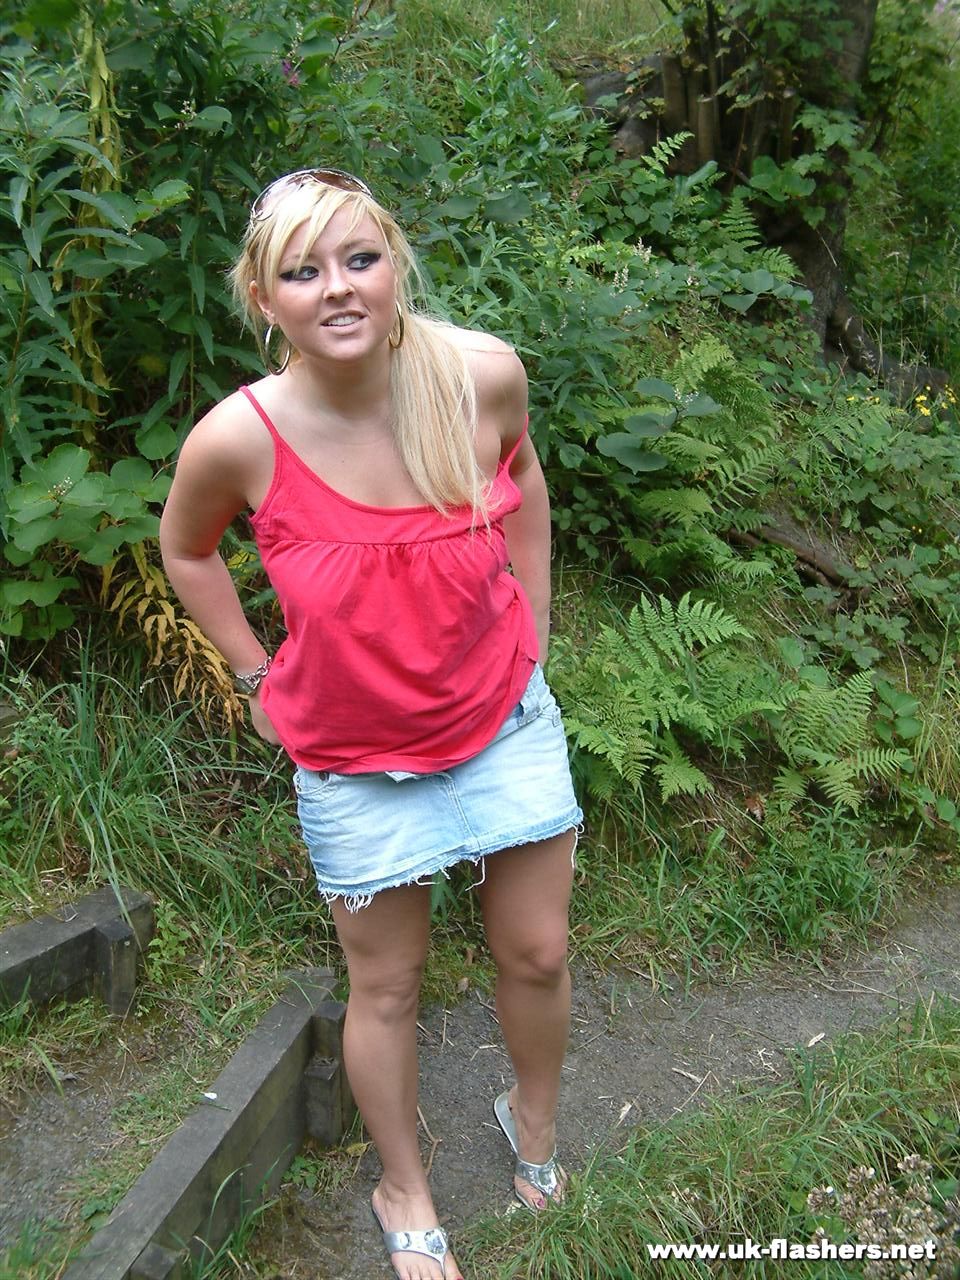 Overweight UK female with blonde hair strips naked on a popular walking trails porno fotky #428197328 | UK Flashers Pics, Lena Leigh, Public, mobilní porno